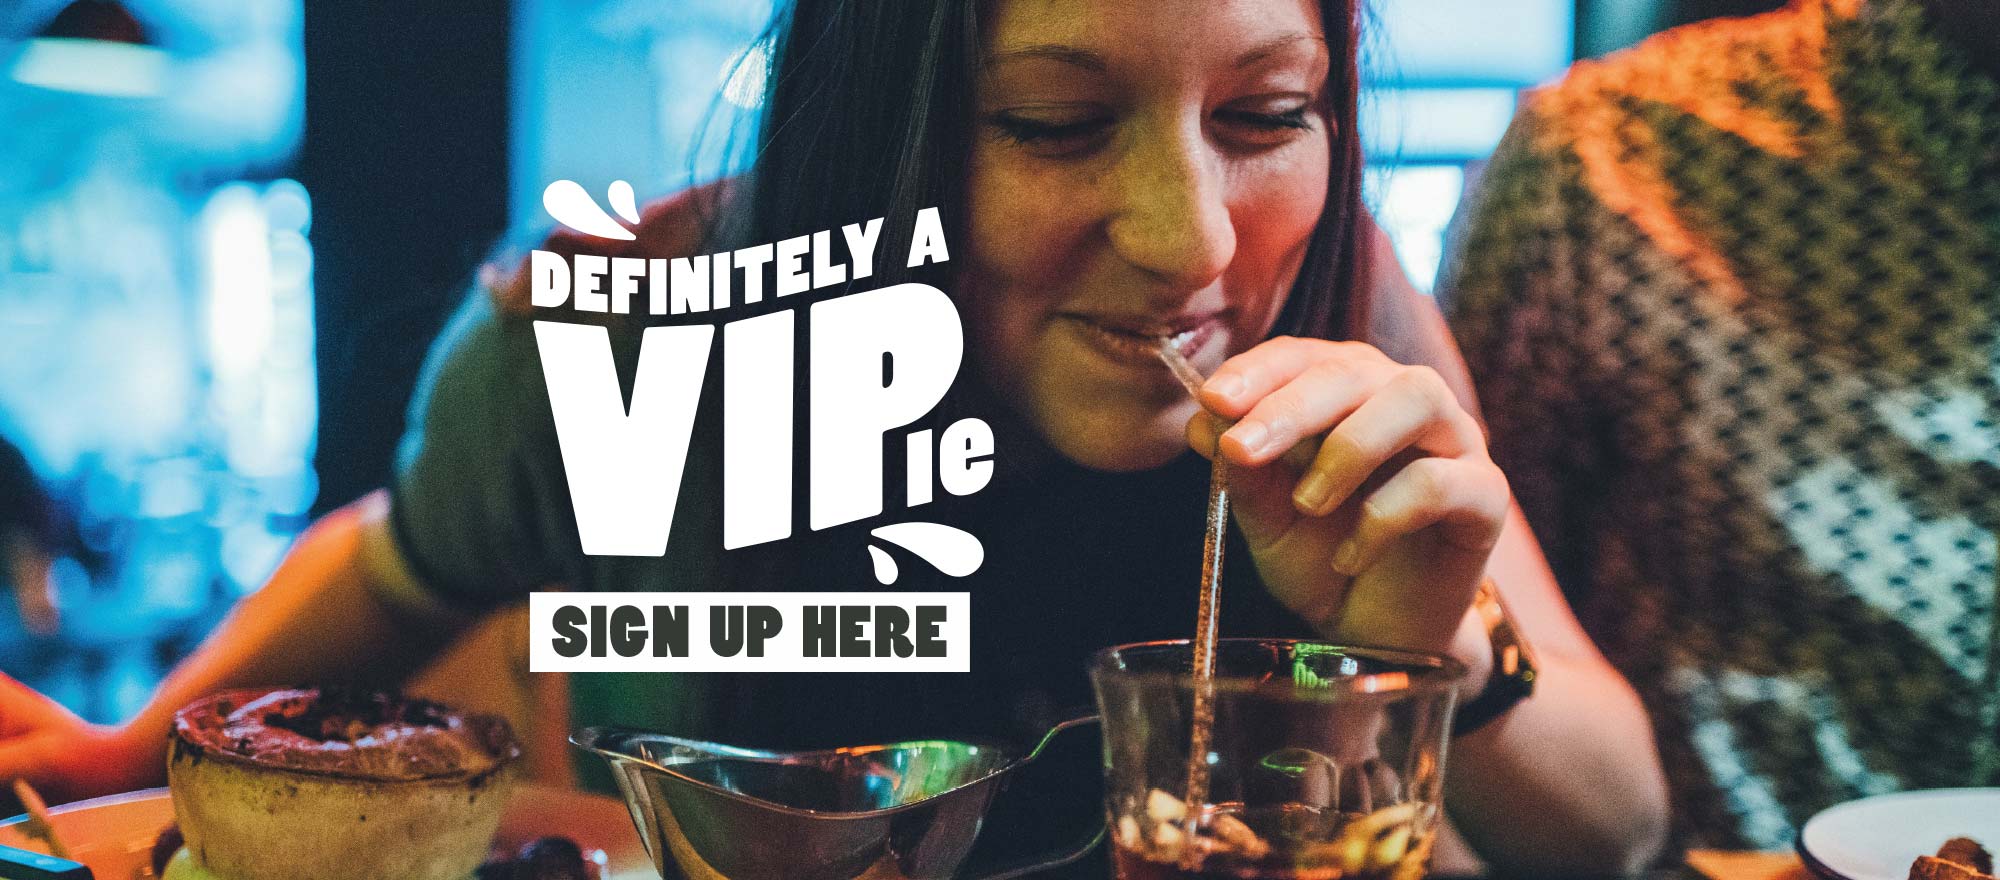 Definitely a VIPIE - sign up here